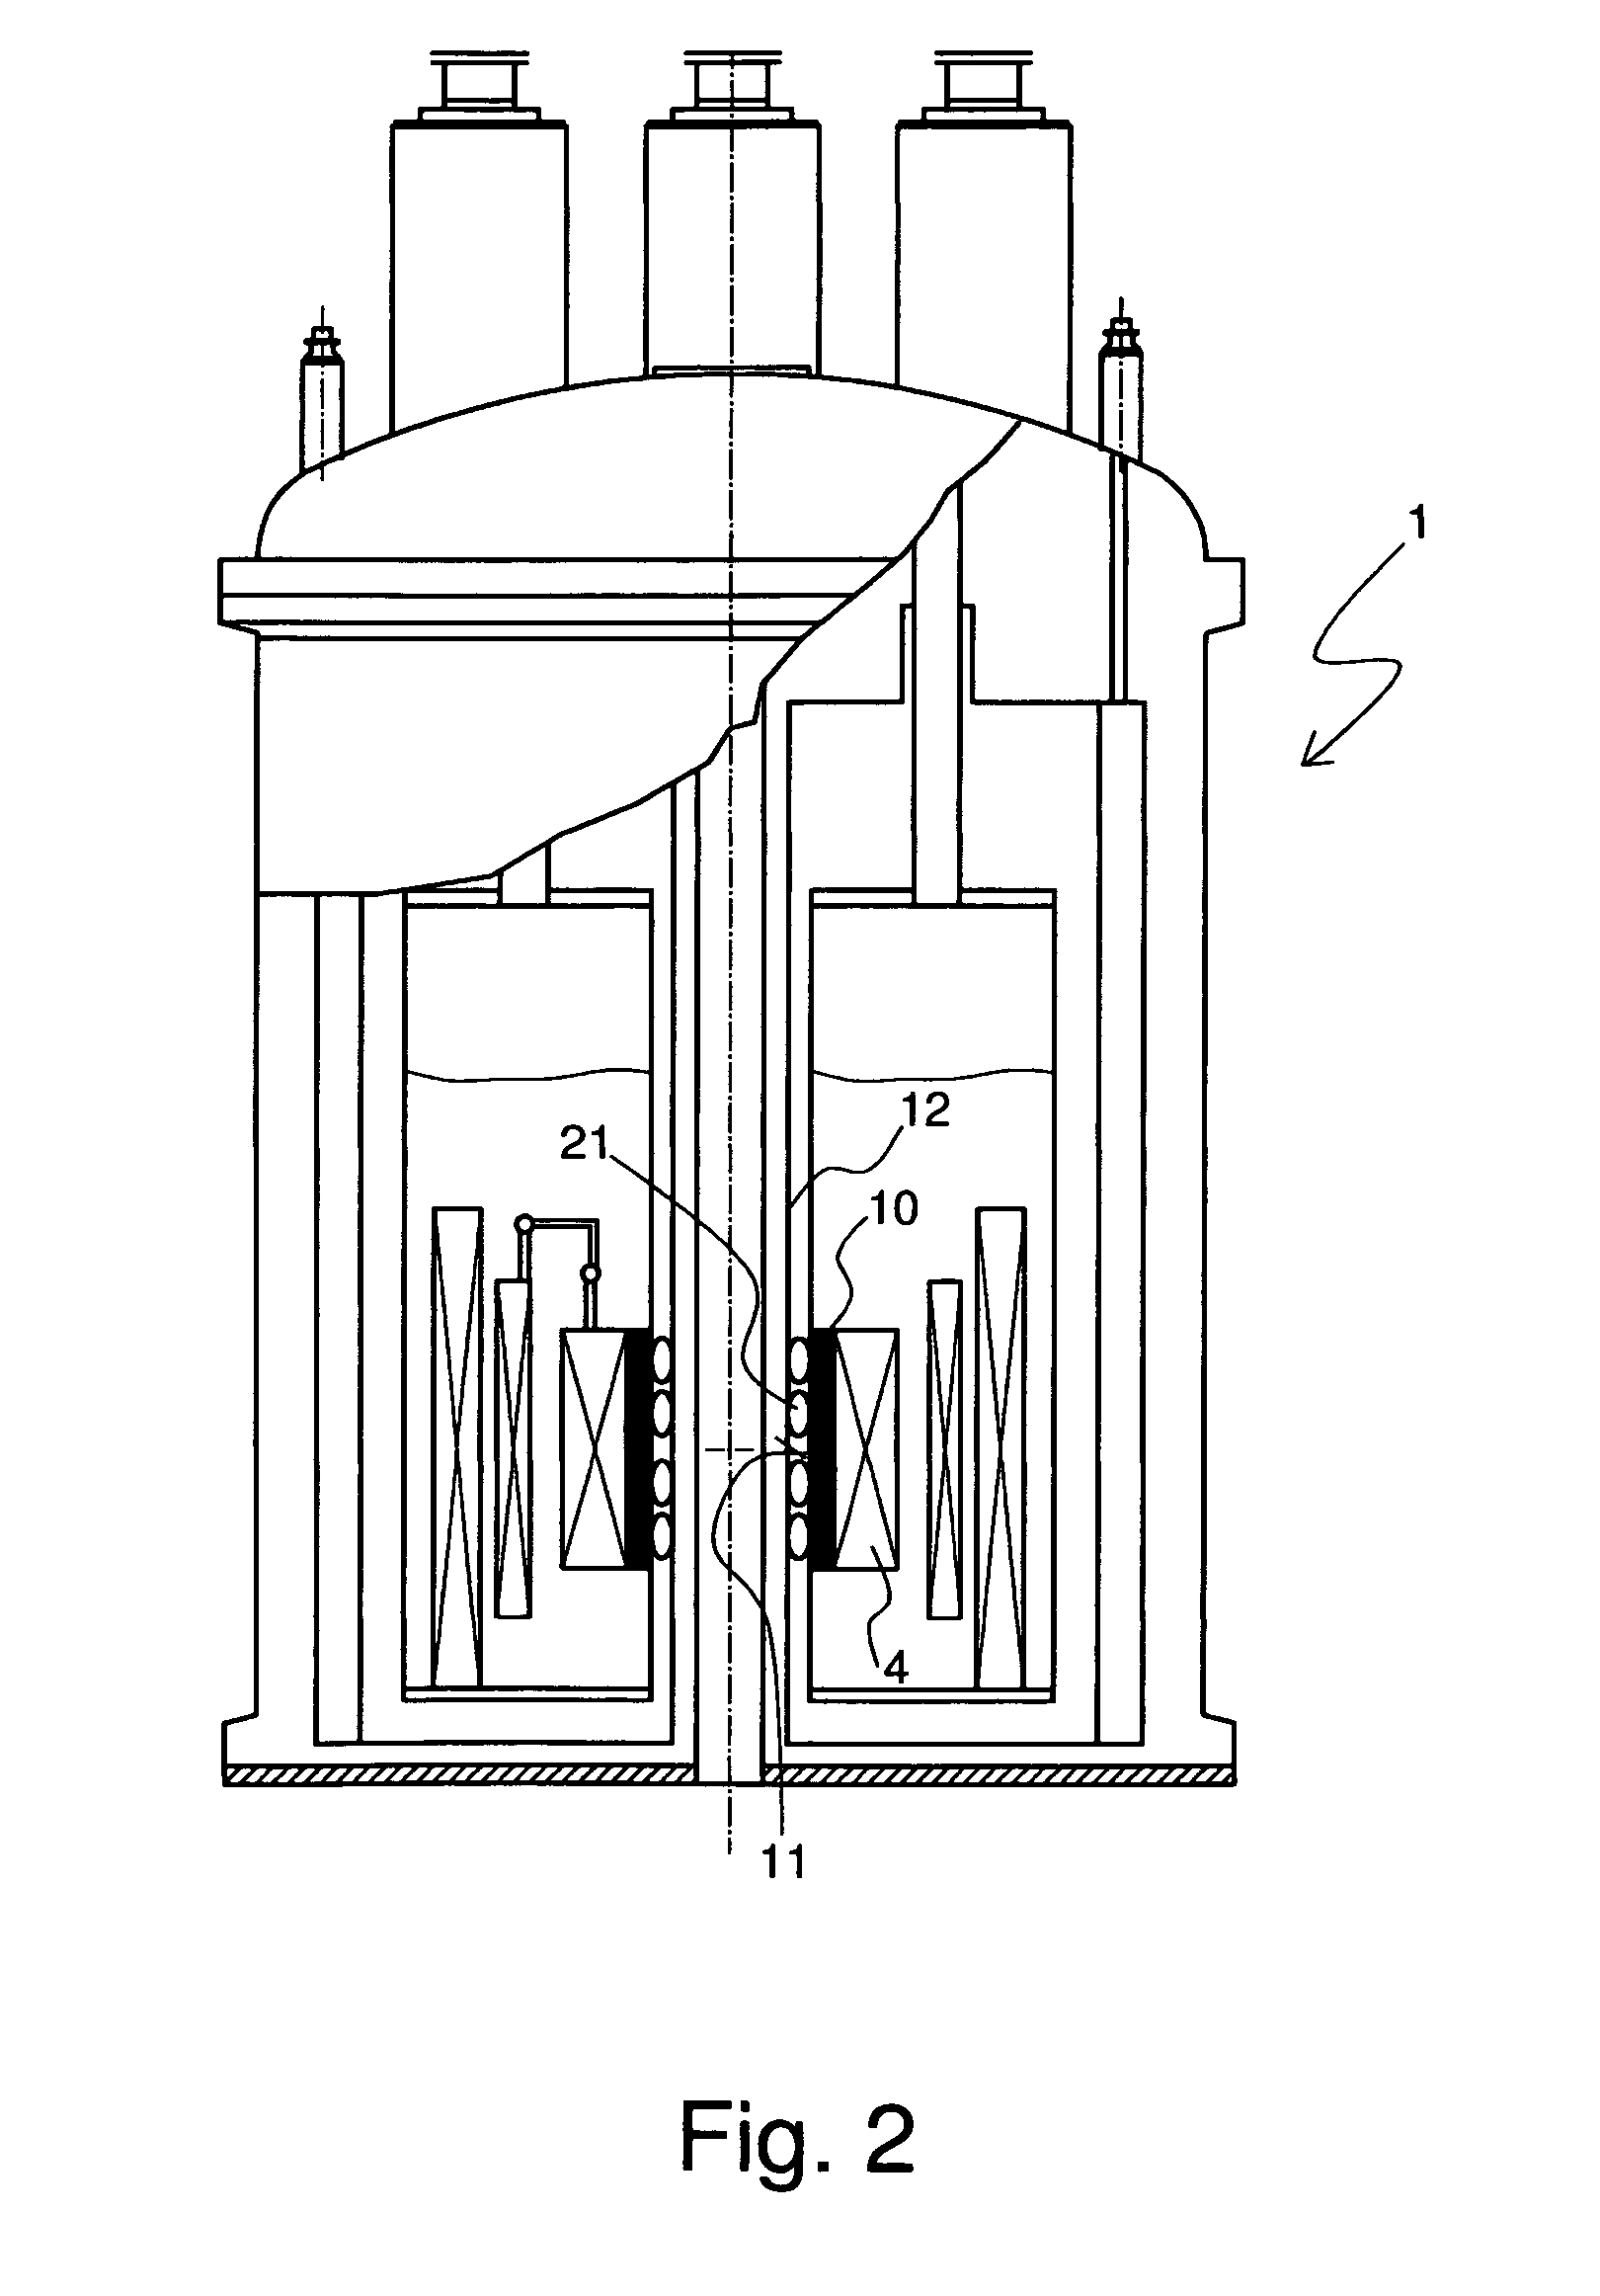 Cryostat having a magnet coil system, which comprises an LTS section and a heatable HTS section